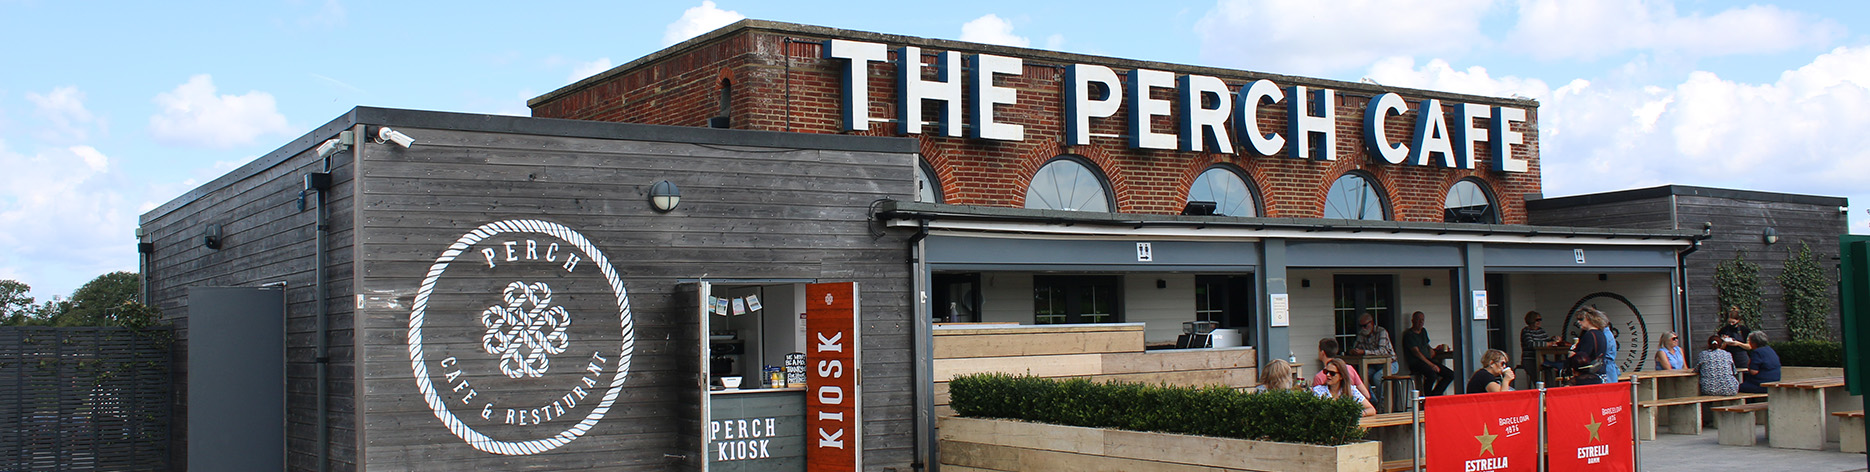 Perch in the Park building in Princes Park Eastbourne